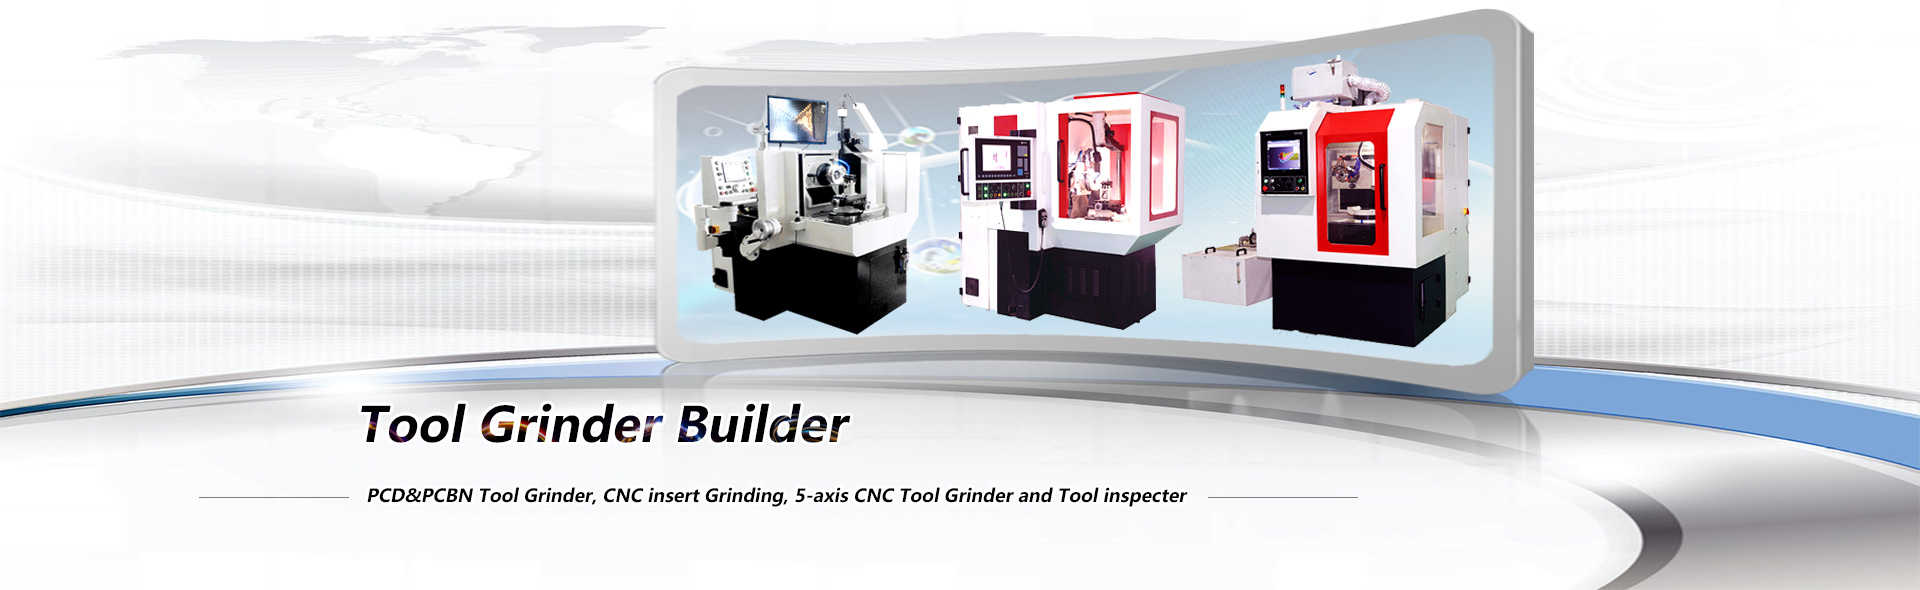 The Basic Function Of The 2-axis CBN Grinding Machine